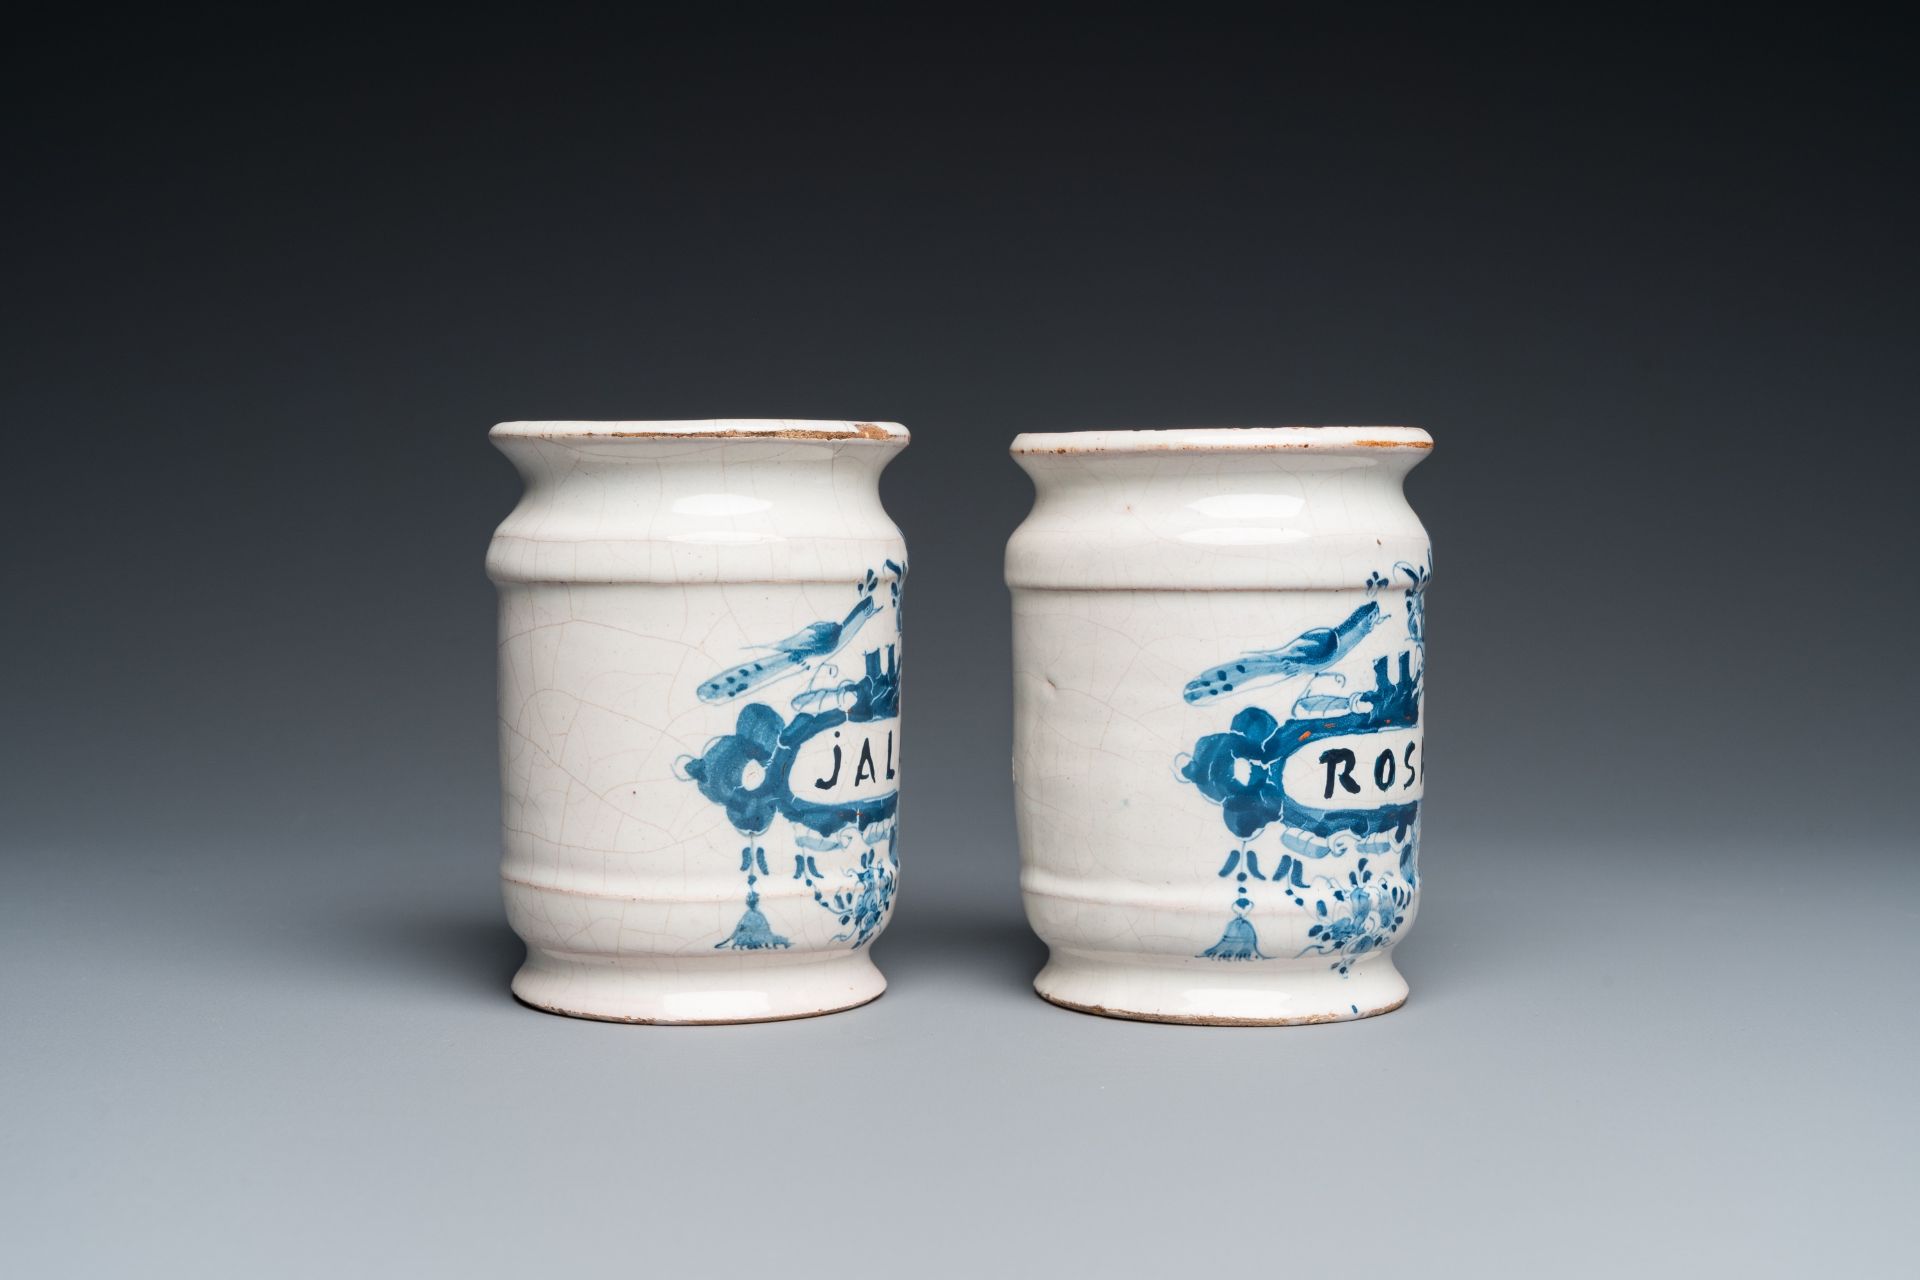 Two Dutch Delft blue and white drug jars and a polychrome Brussels faience dish with a rider on hors - Image 6 of 10